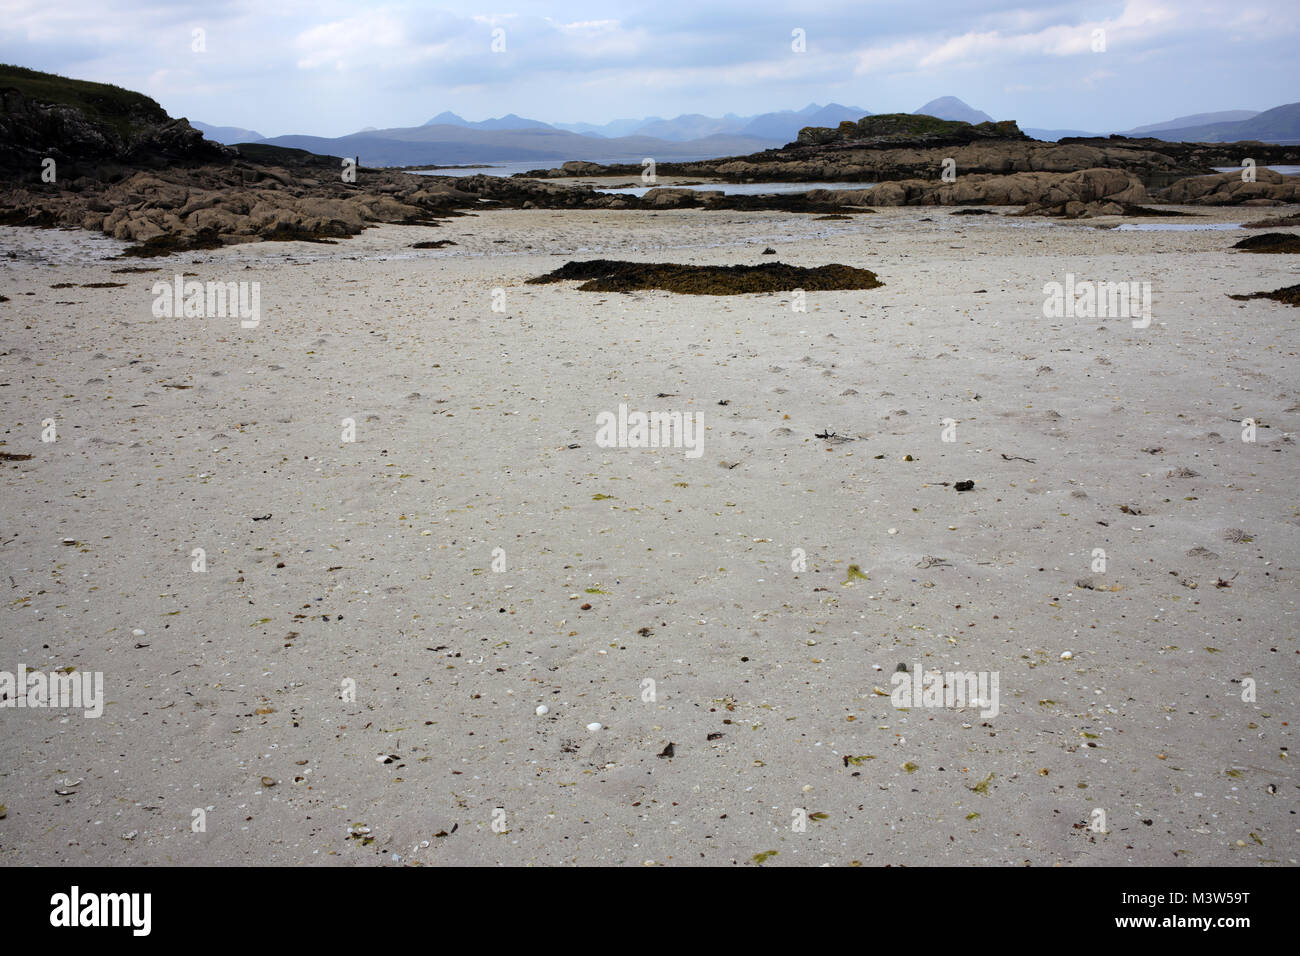 Coral beach with view on the Cuillins mountain range - Applecross - Highlands - Scotland - UK Stock Photo